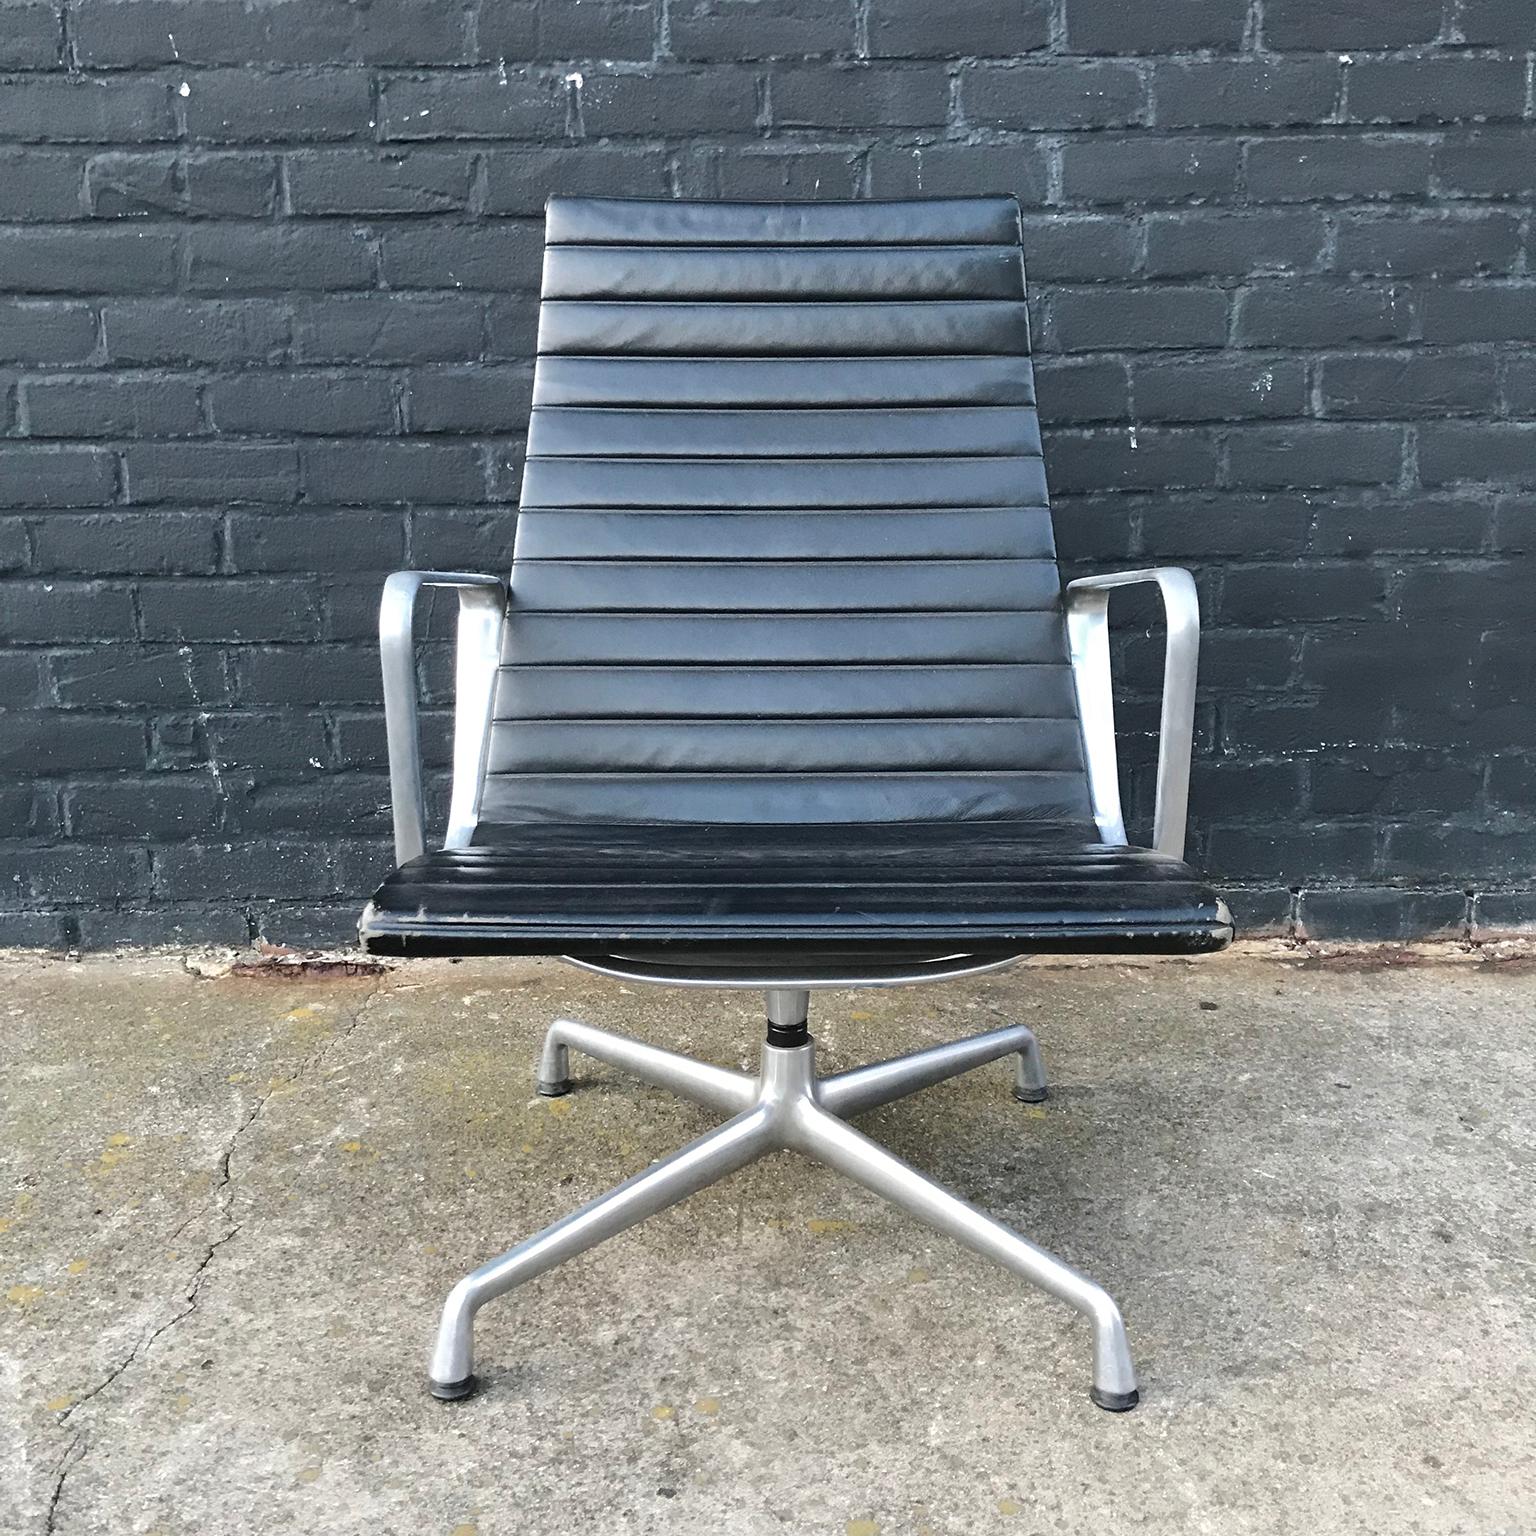 Mid-Century Modern 1958, Ray & Charles Eames for Vitra Lounge Chair EA 116 in Black Leather For Sale